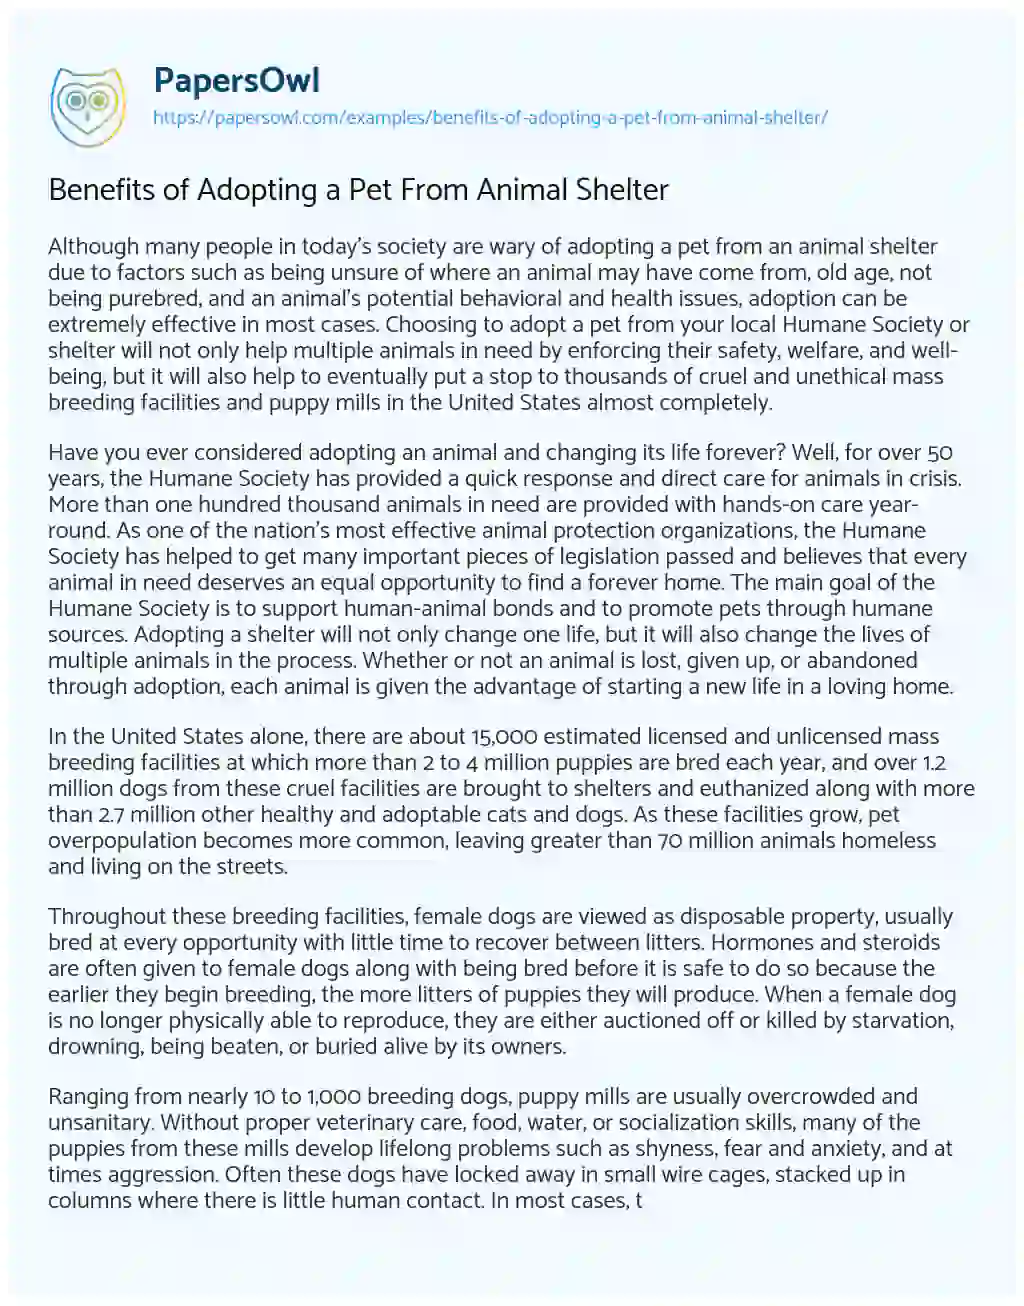 Essay on Benefits of Adopting a Pet from Animal Shelter